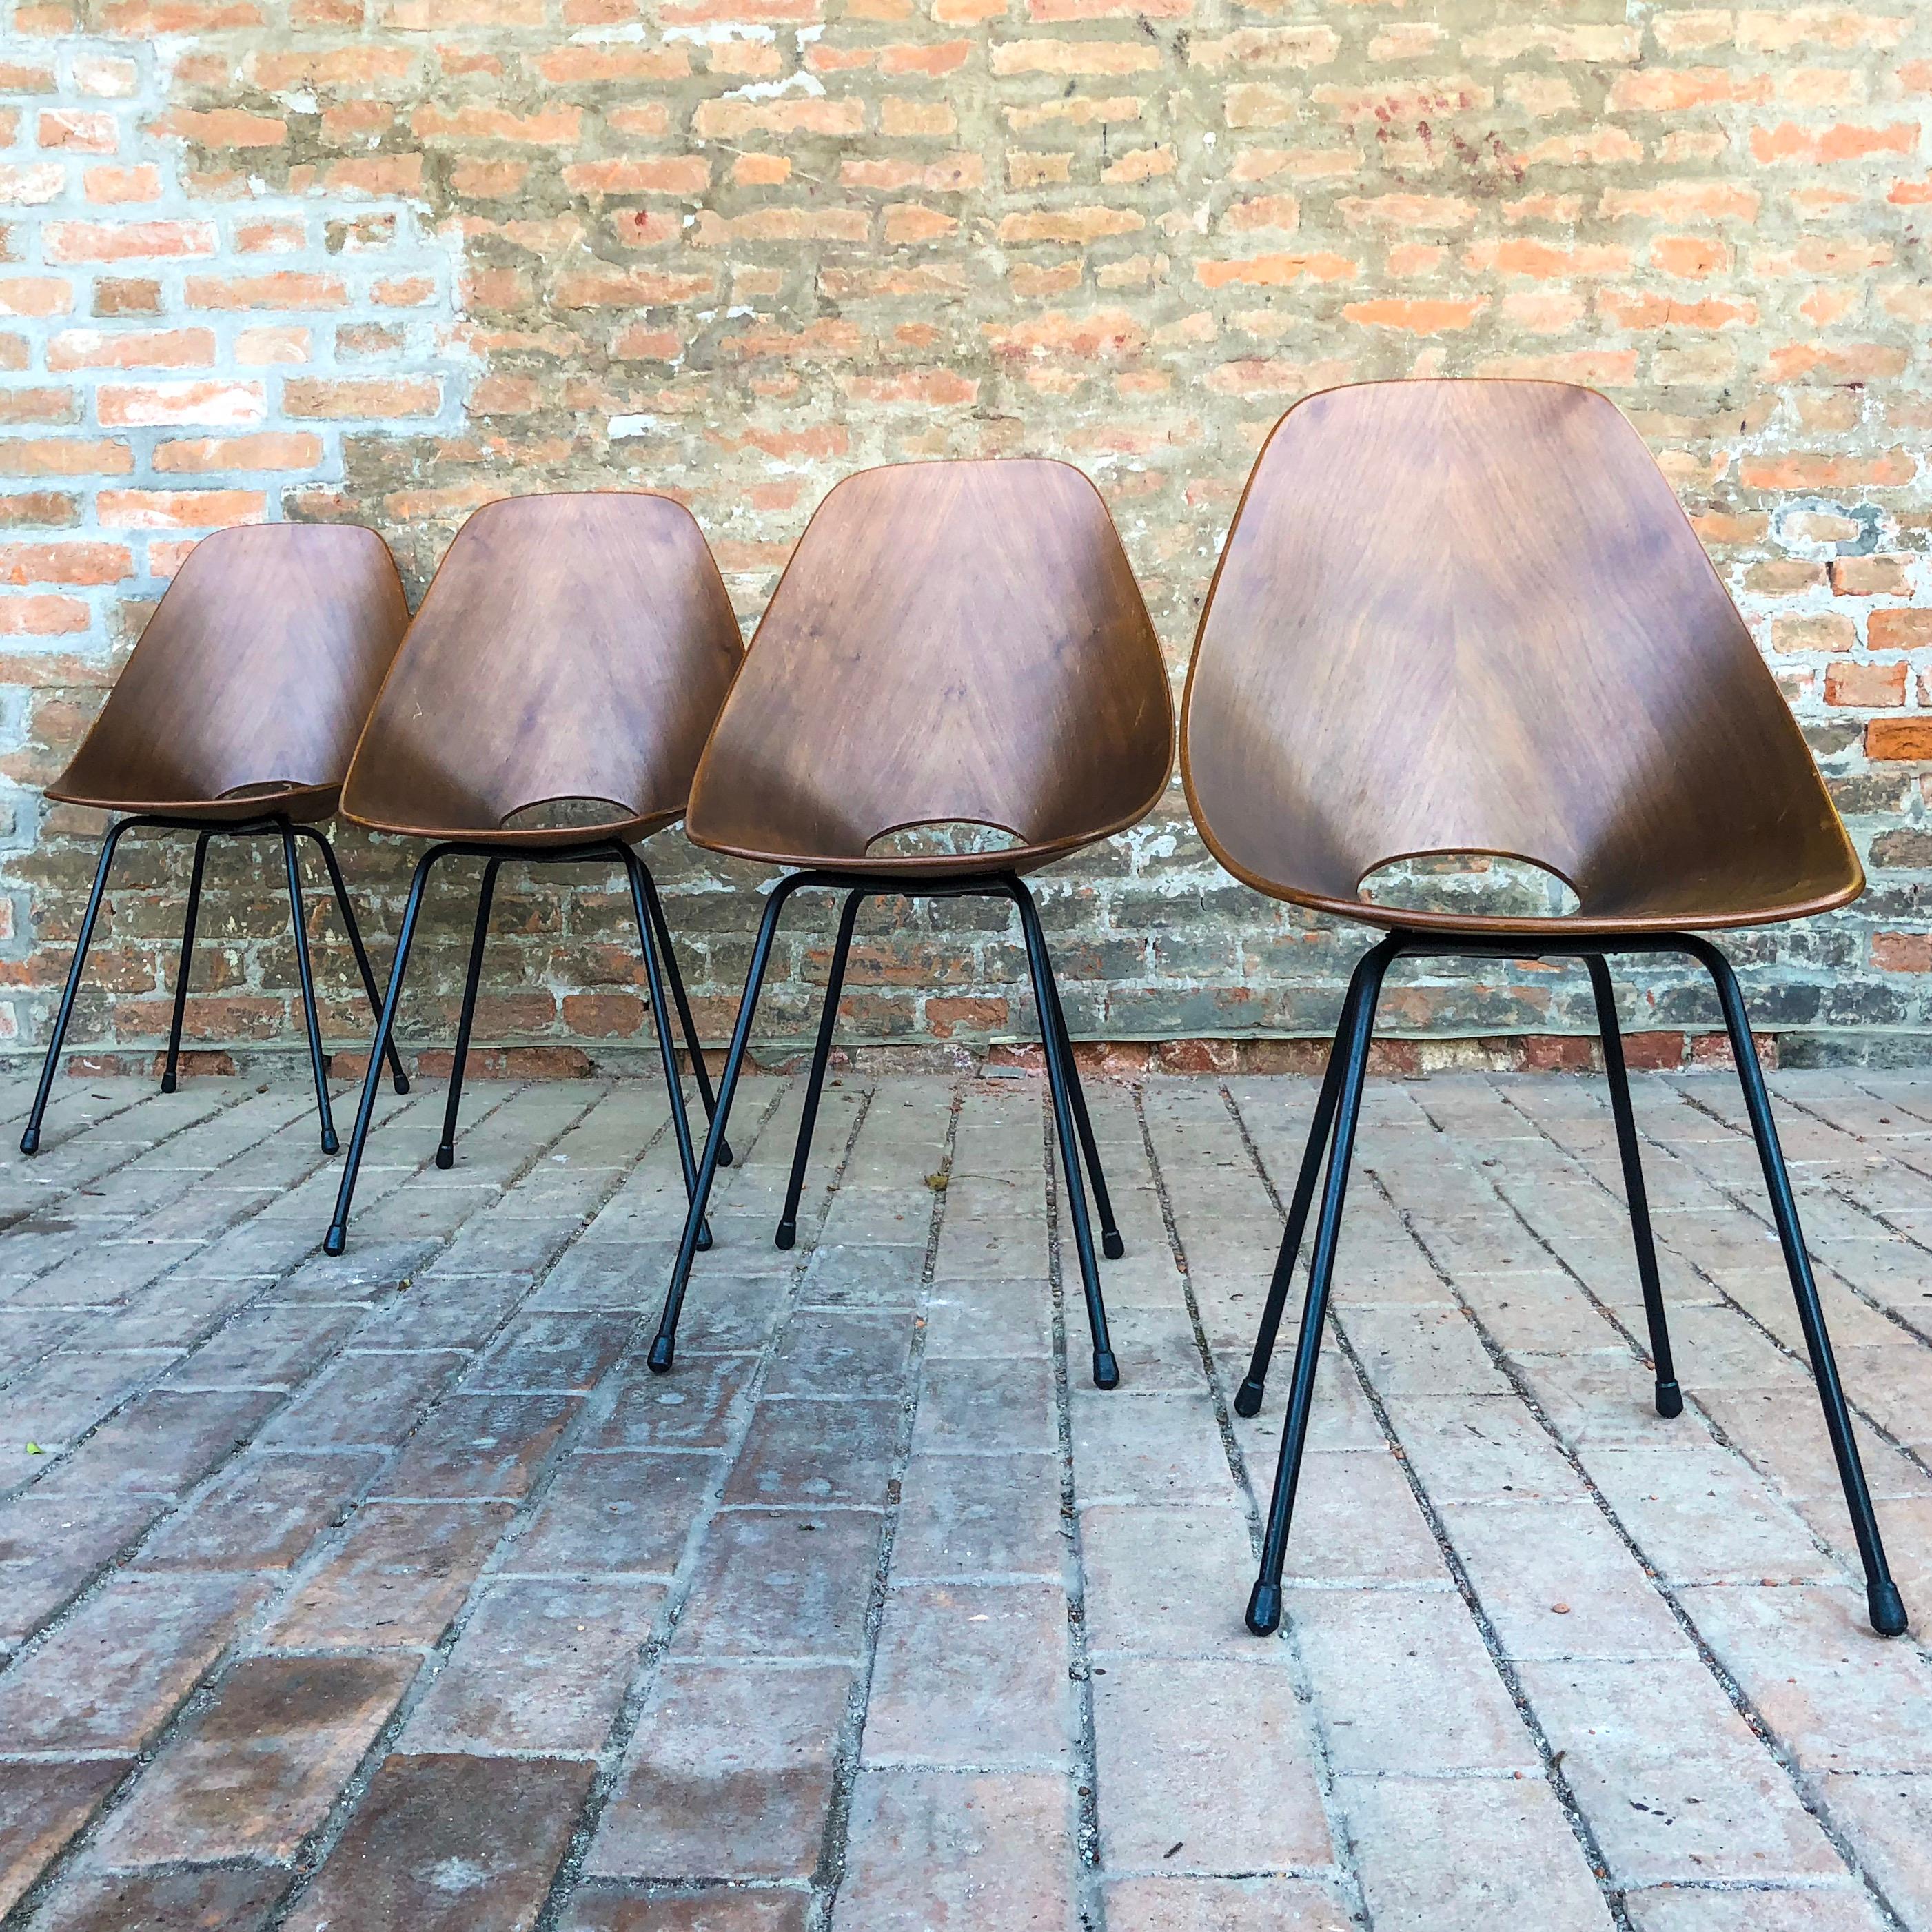 Vittorio Nobili Midcentury Teak Medea Dining Room Chairs, 1956, Set of Four In Good Condition For Sale In Padova, IT